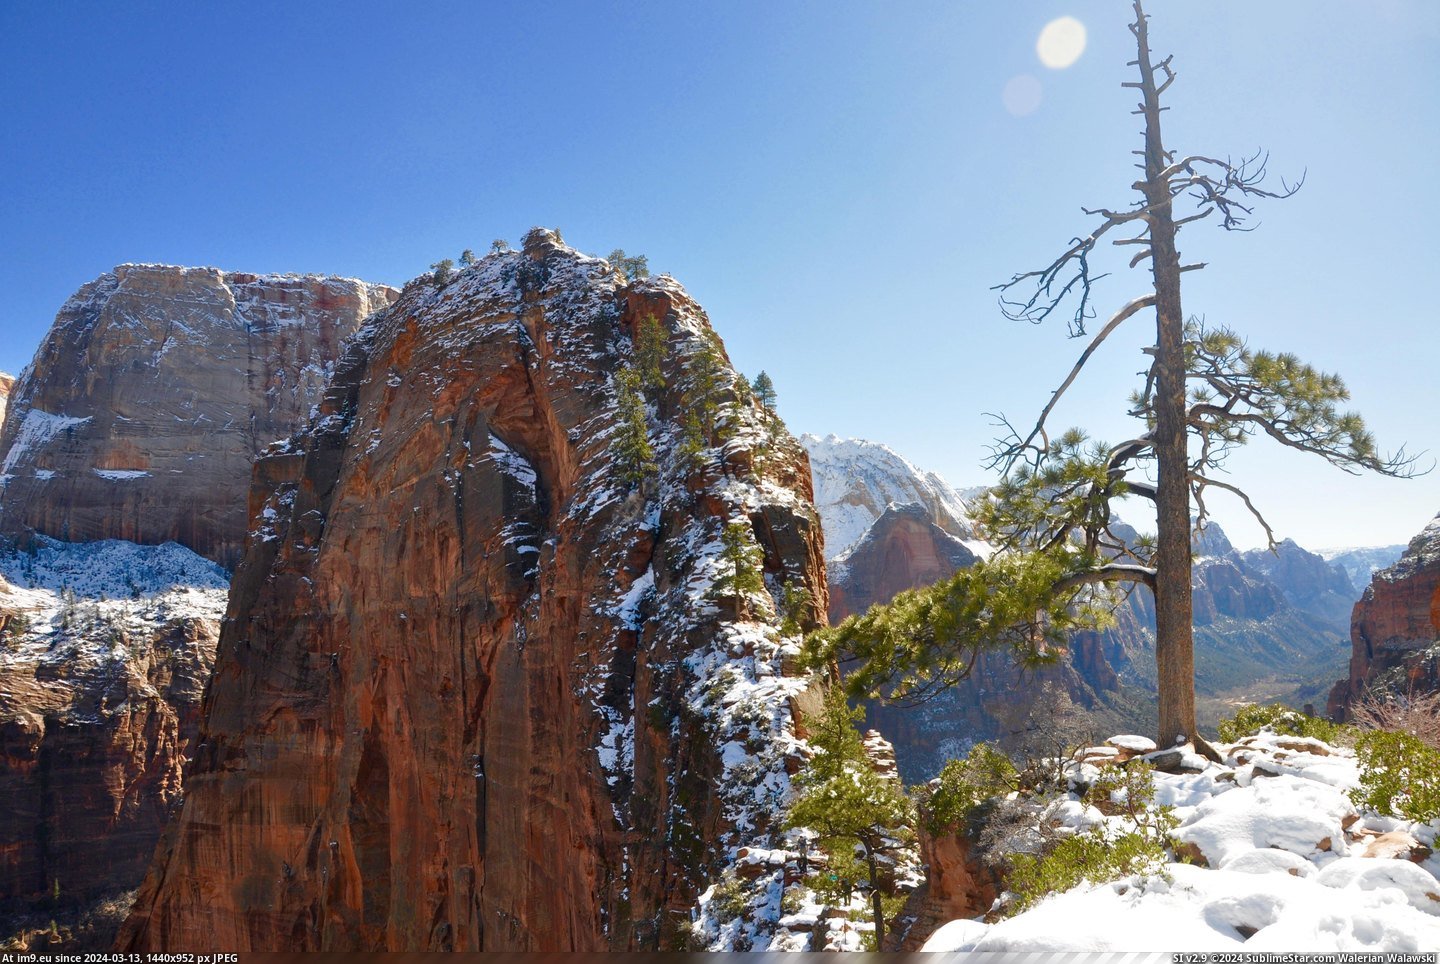 #Park #National #Zion #4288x2848 #Angel #Landing [Earthporn] Summiting a snowcapped Angel's Landing in Zion National Park, UT [4288x2848] Pic. (Image of album My r/EARTHPORN favs))